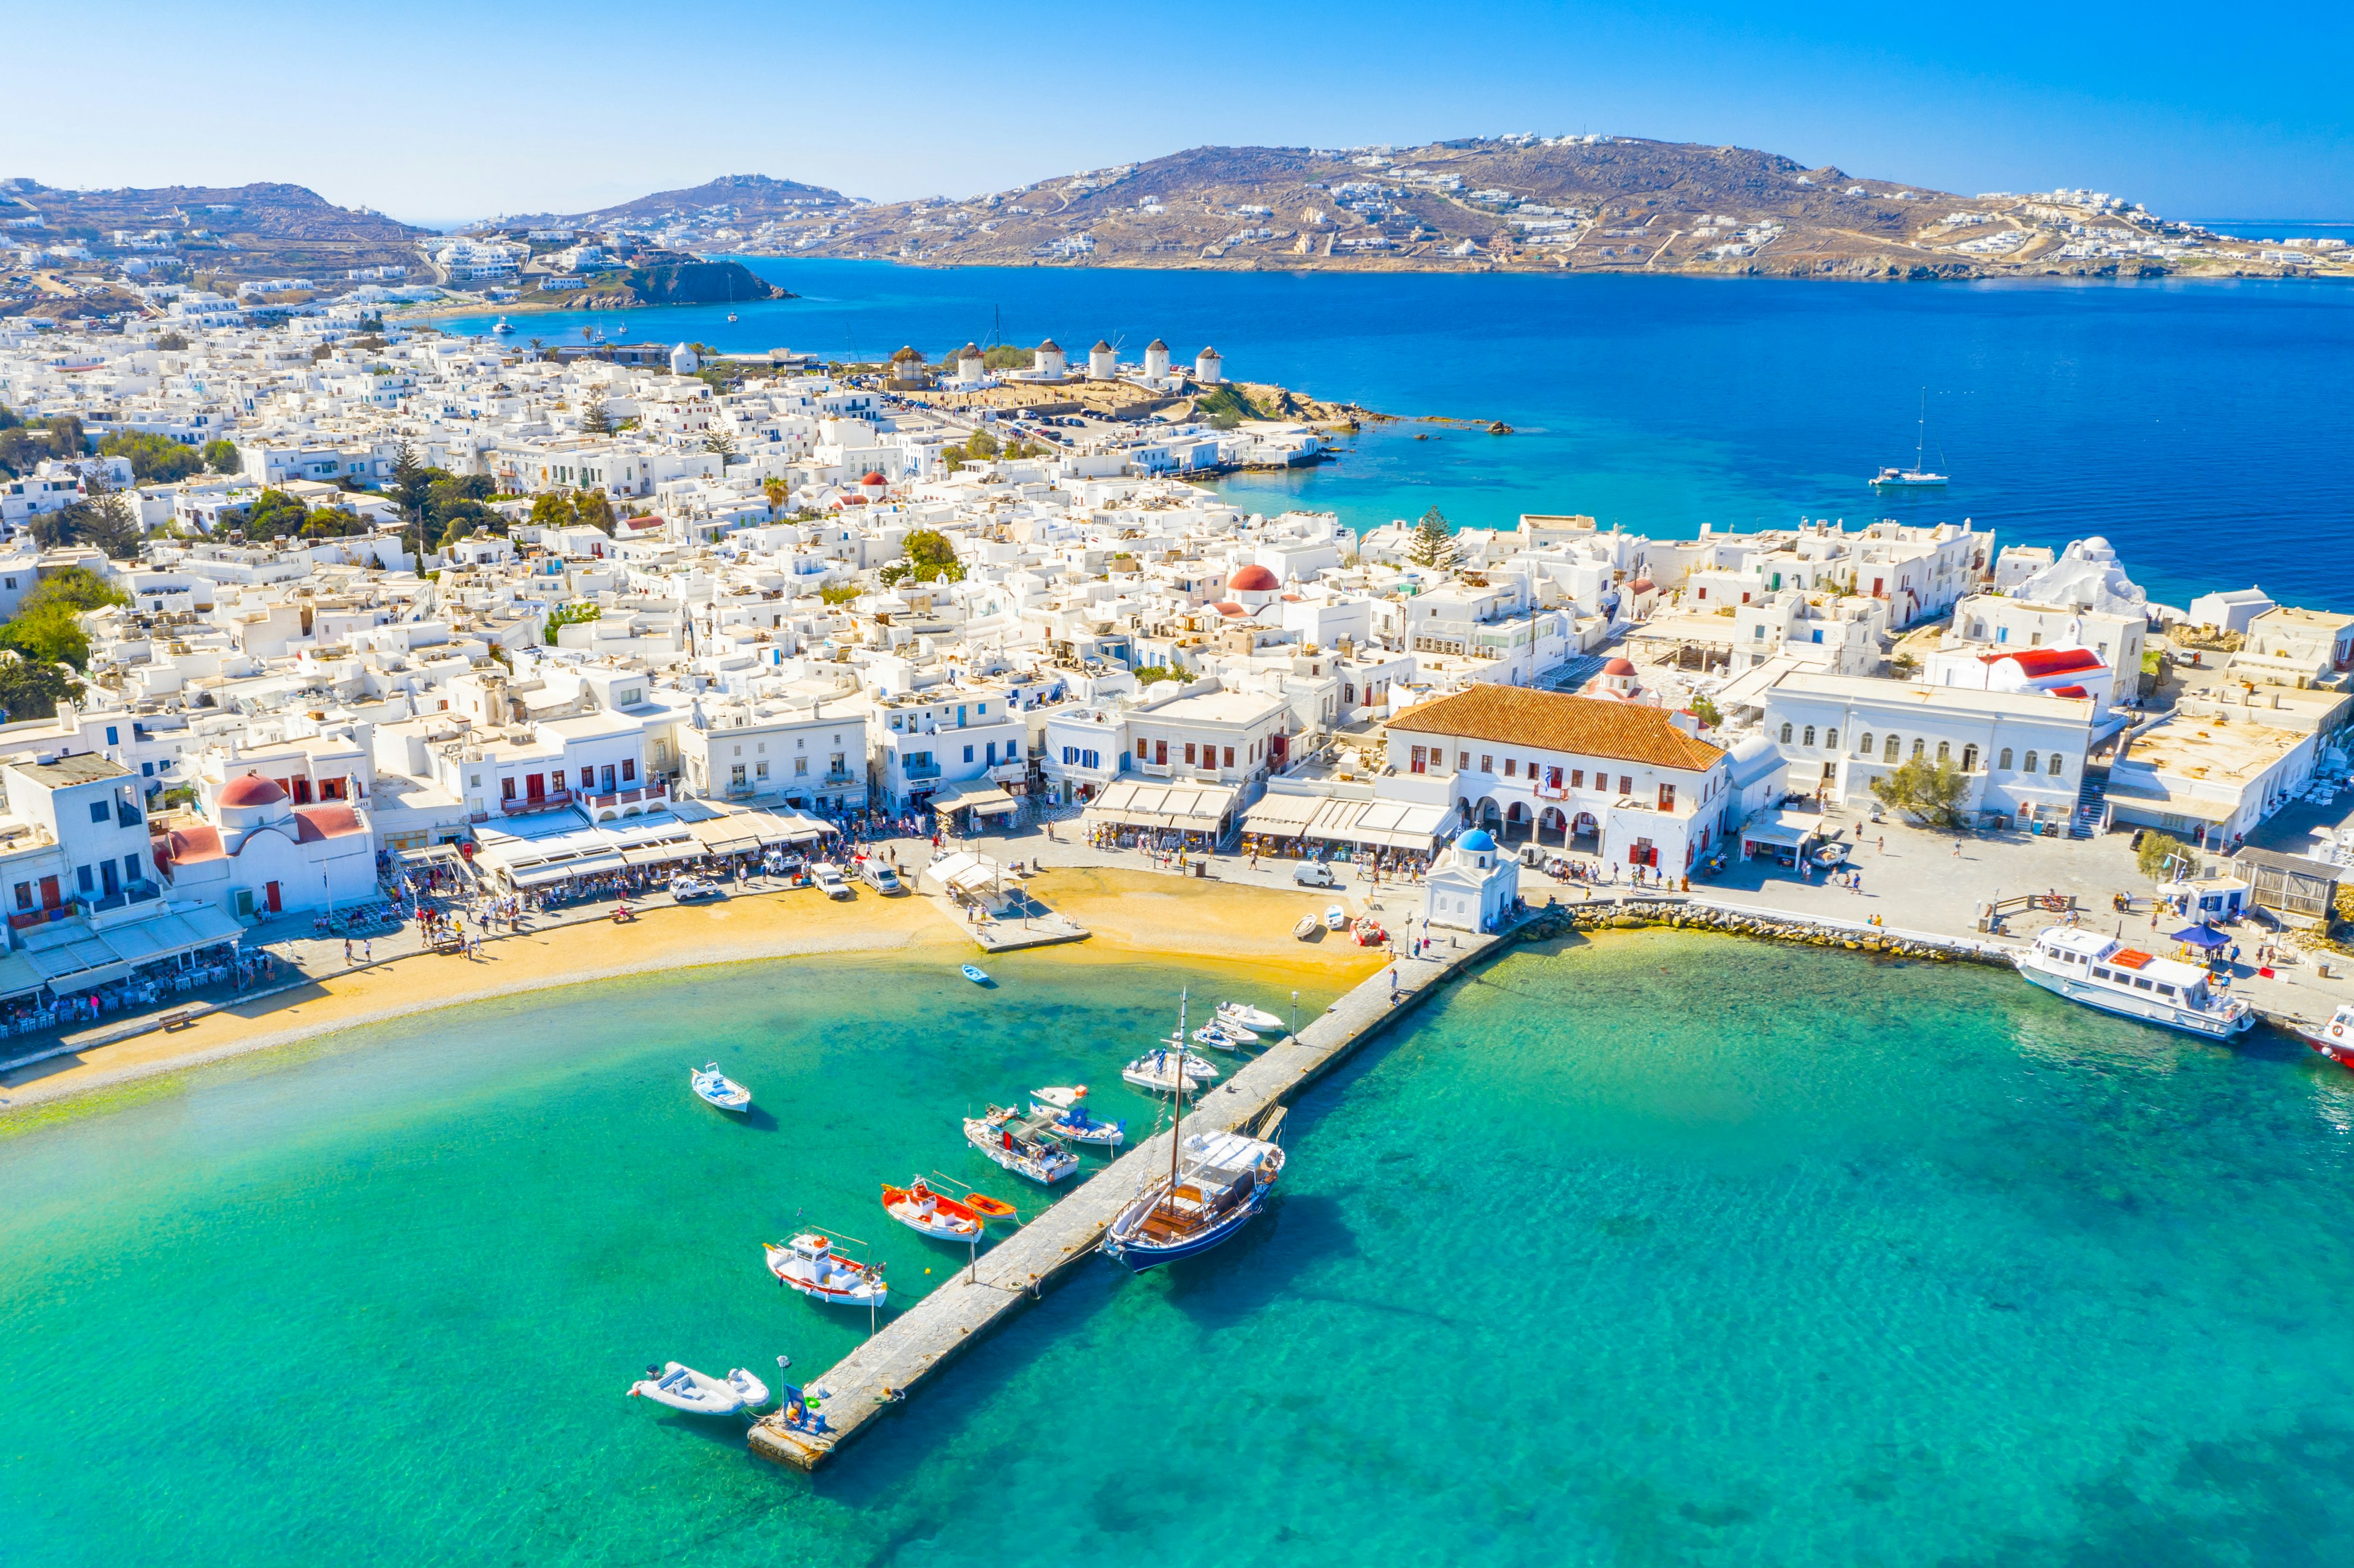 Aerial of a jetty at Mykonos town.